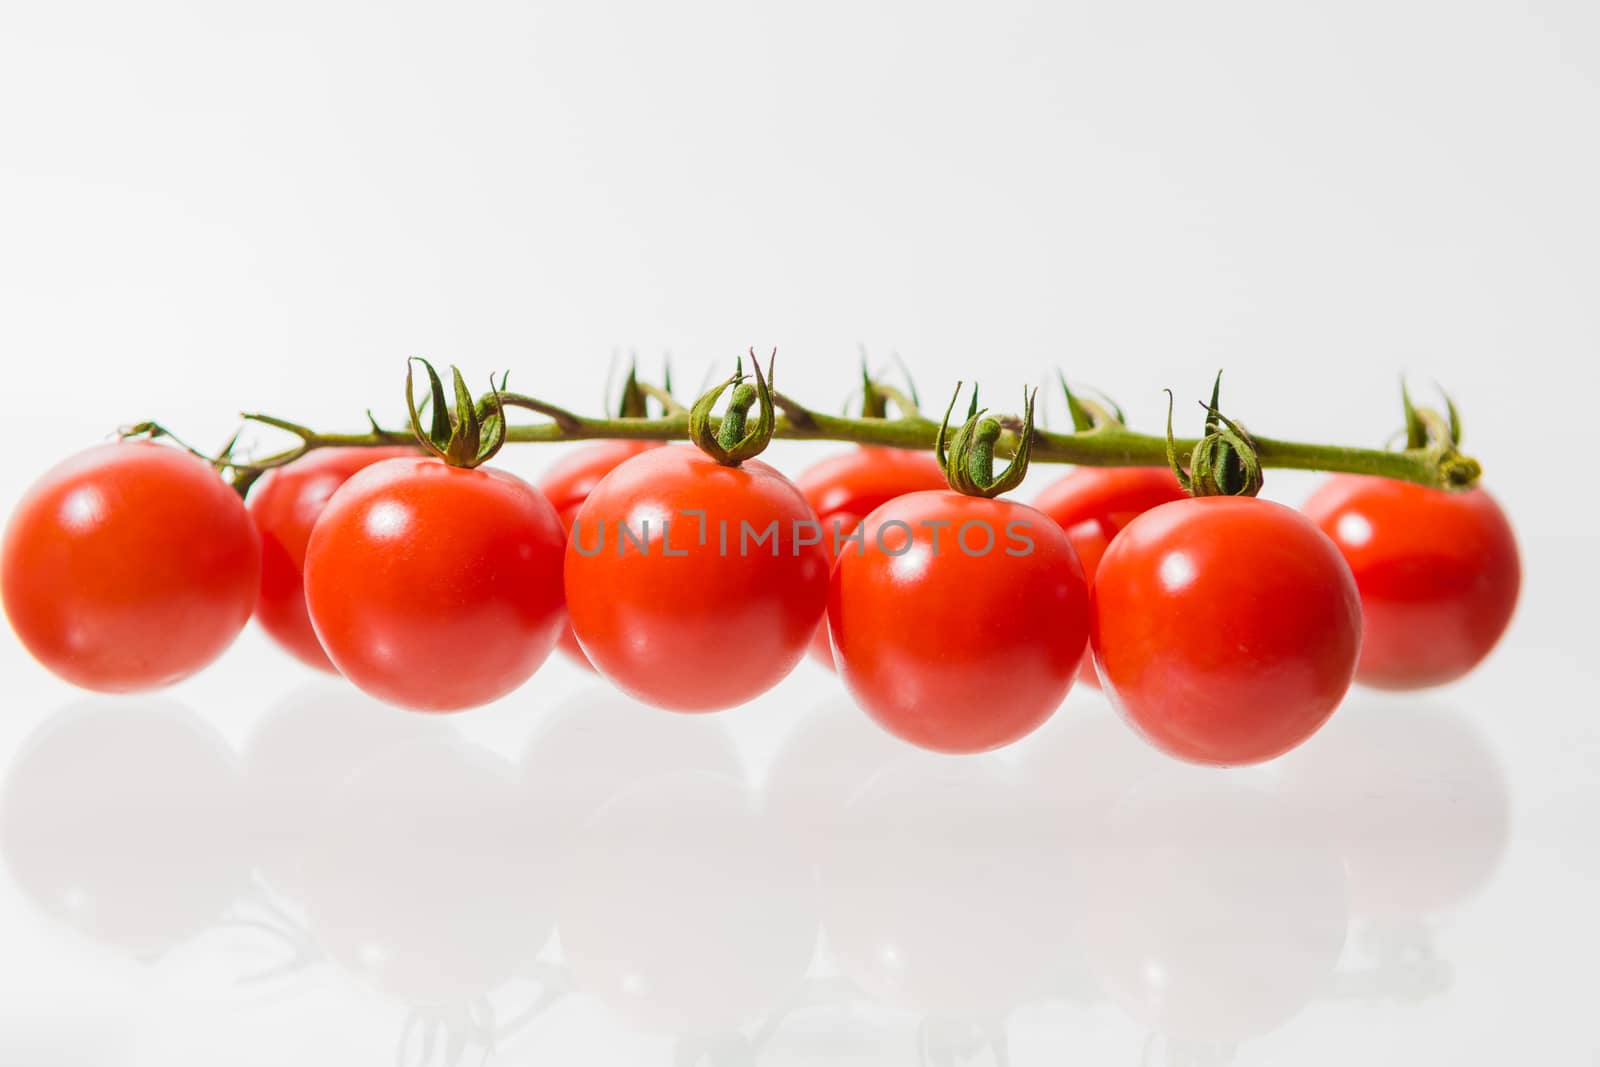 Small red Cherry tomatoes are lying branch isolated on white background with reflection